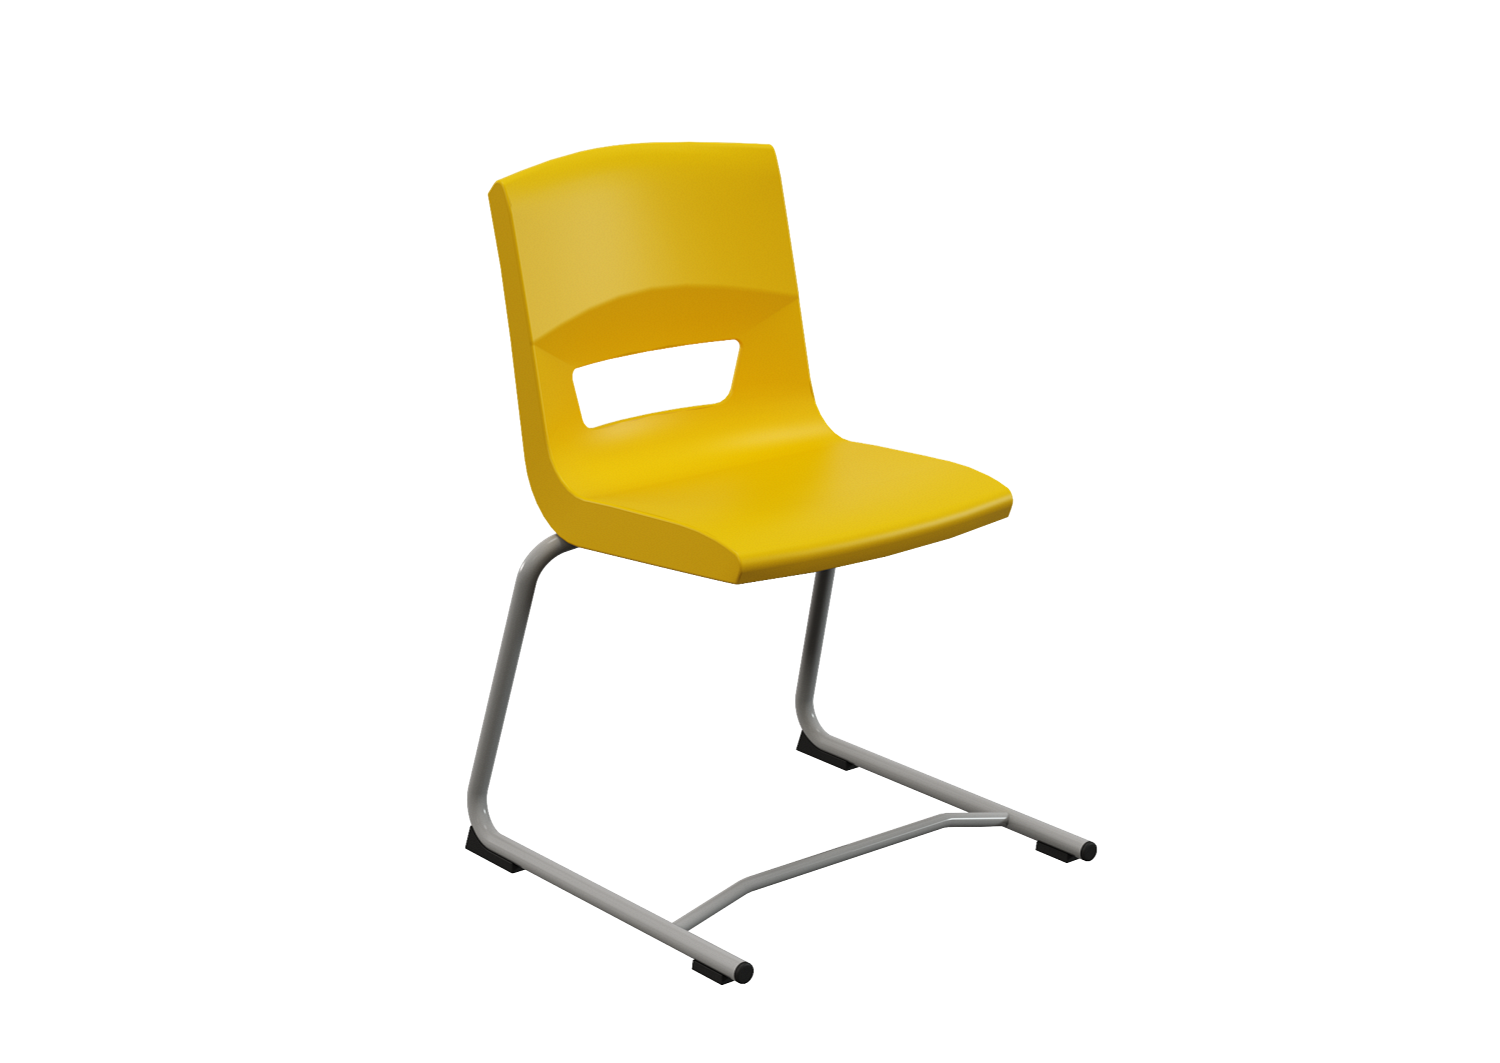 Postura reverse cantilevedr chair for classrom and kitchen sun yellow